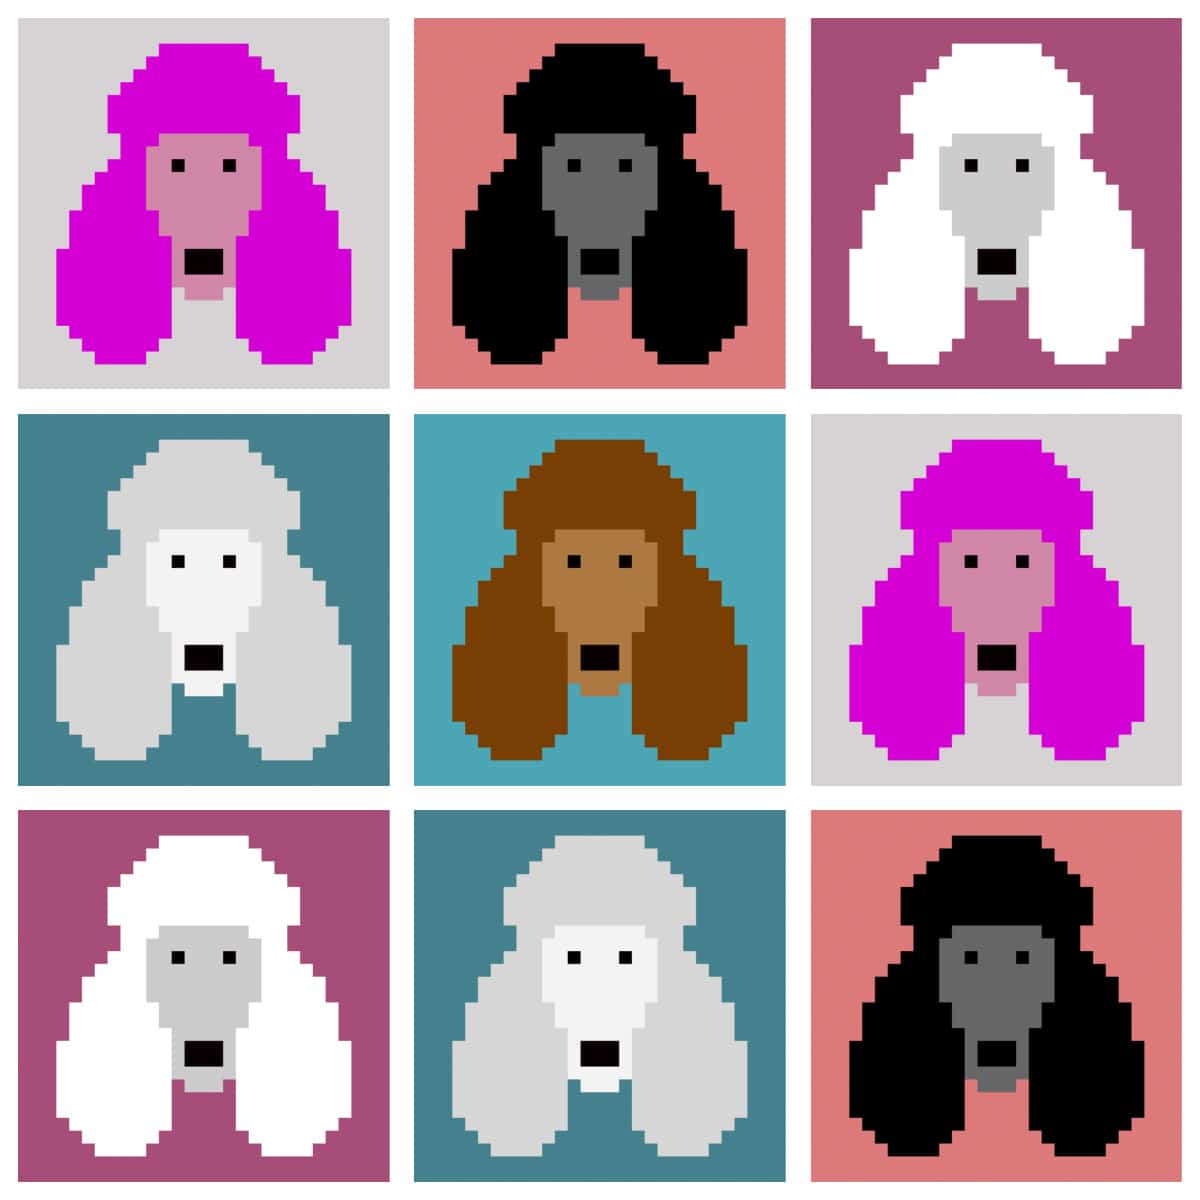 This image shows a grid of nine Poodle faces in pixel illustration form. The squares are alternating with the Poodle faces in different colors, including black, pink, white, and gray. This shows an example of how a corner to corner crochet blanket might look with the Poodle face pattern square.